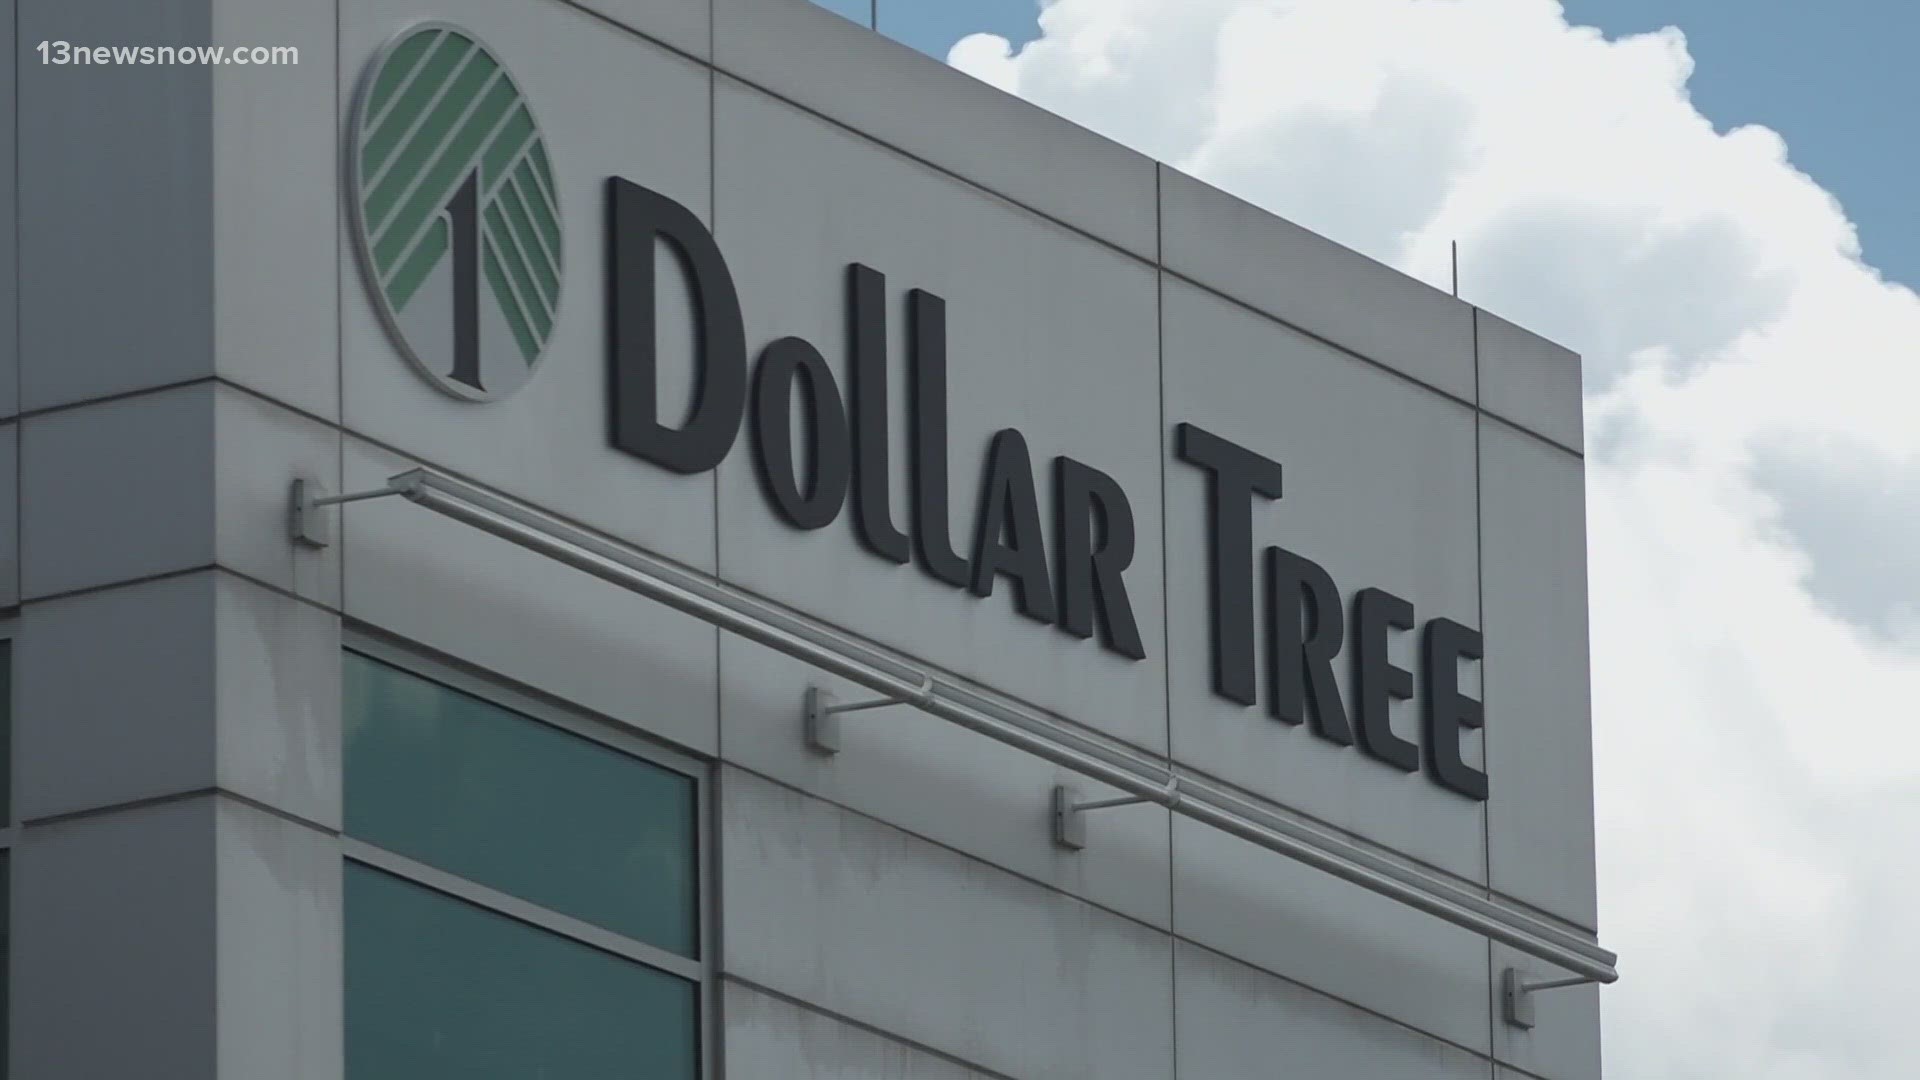 Dollar Tree employees past and present might get an alarming letter in the mail.